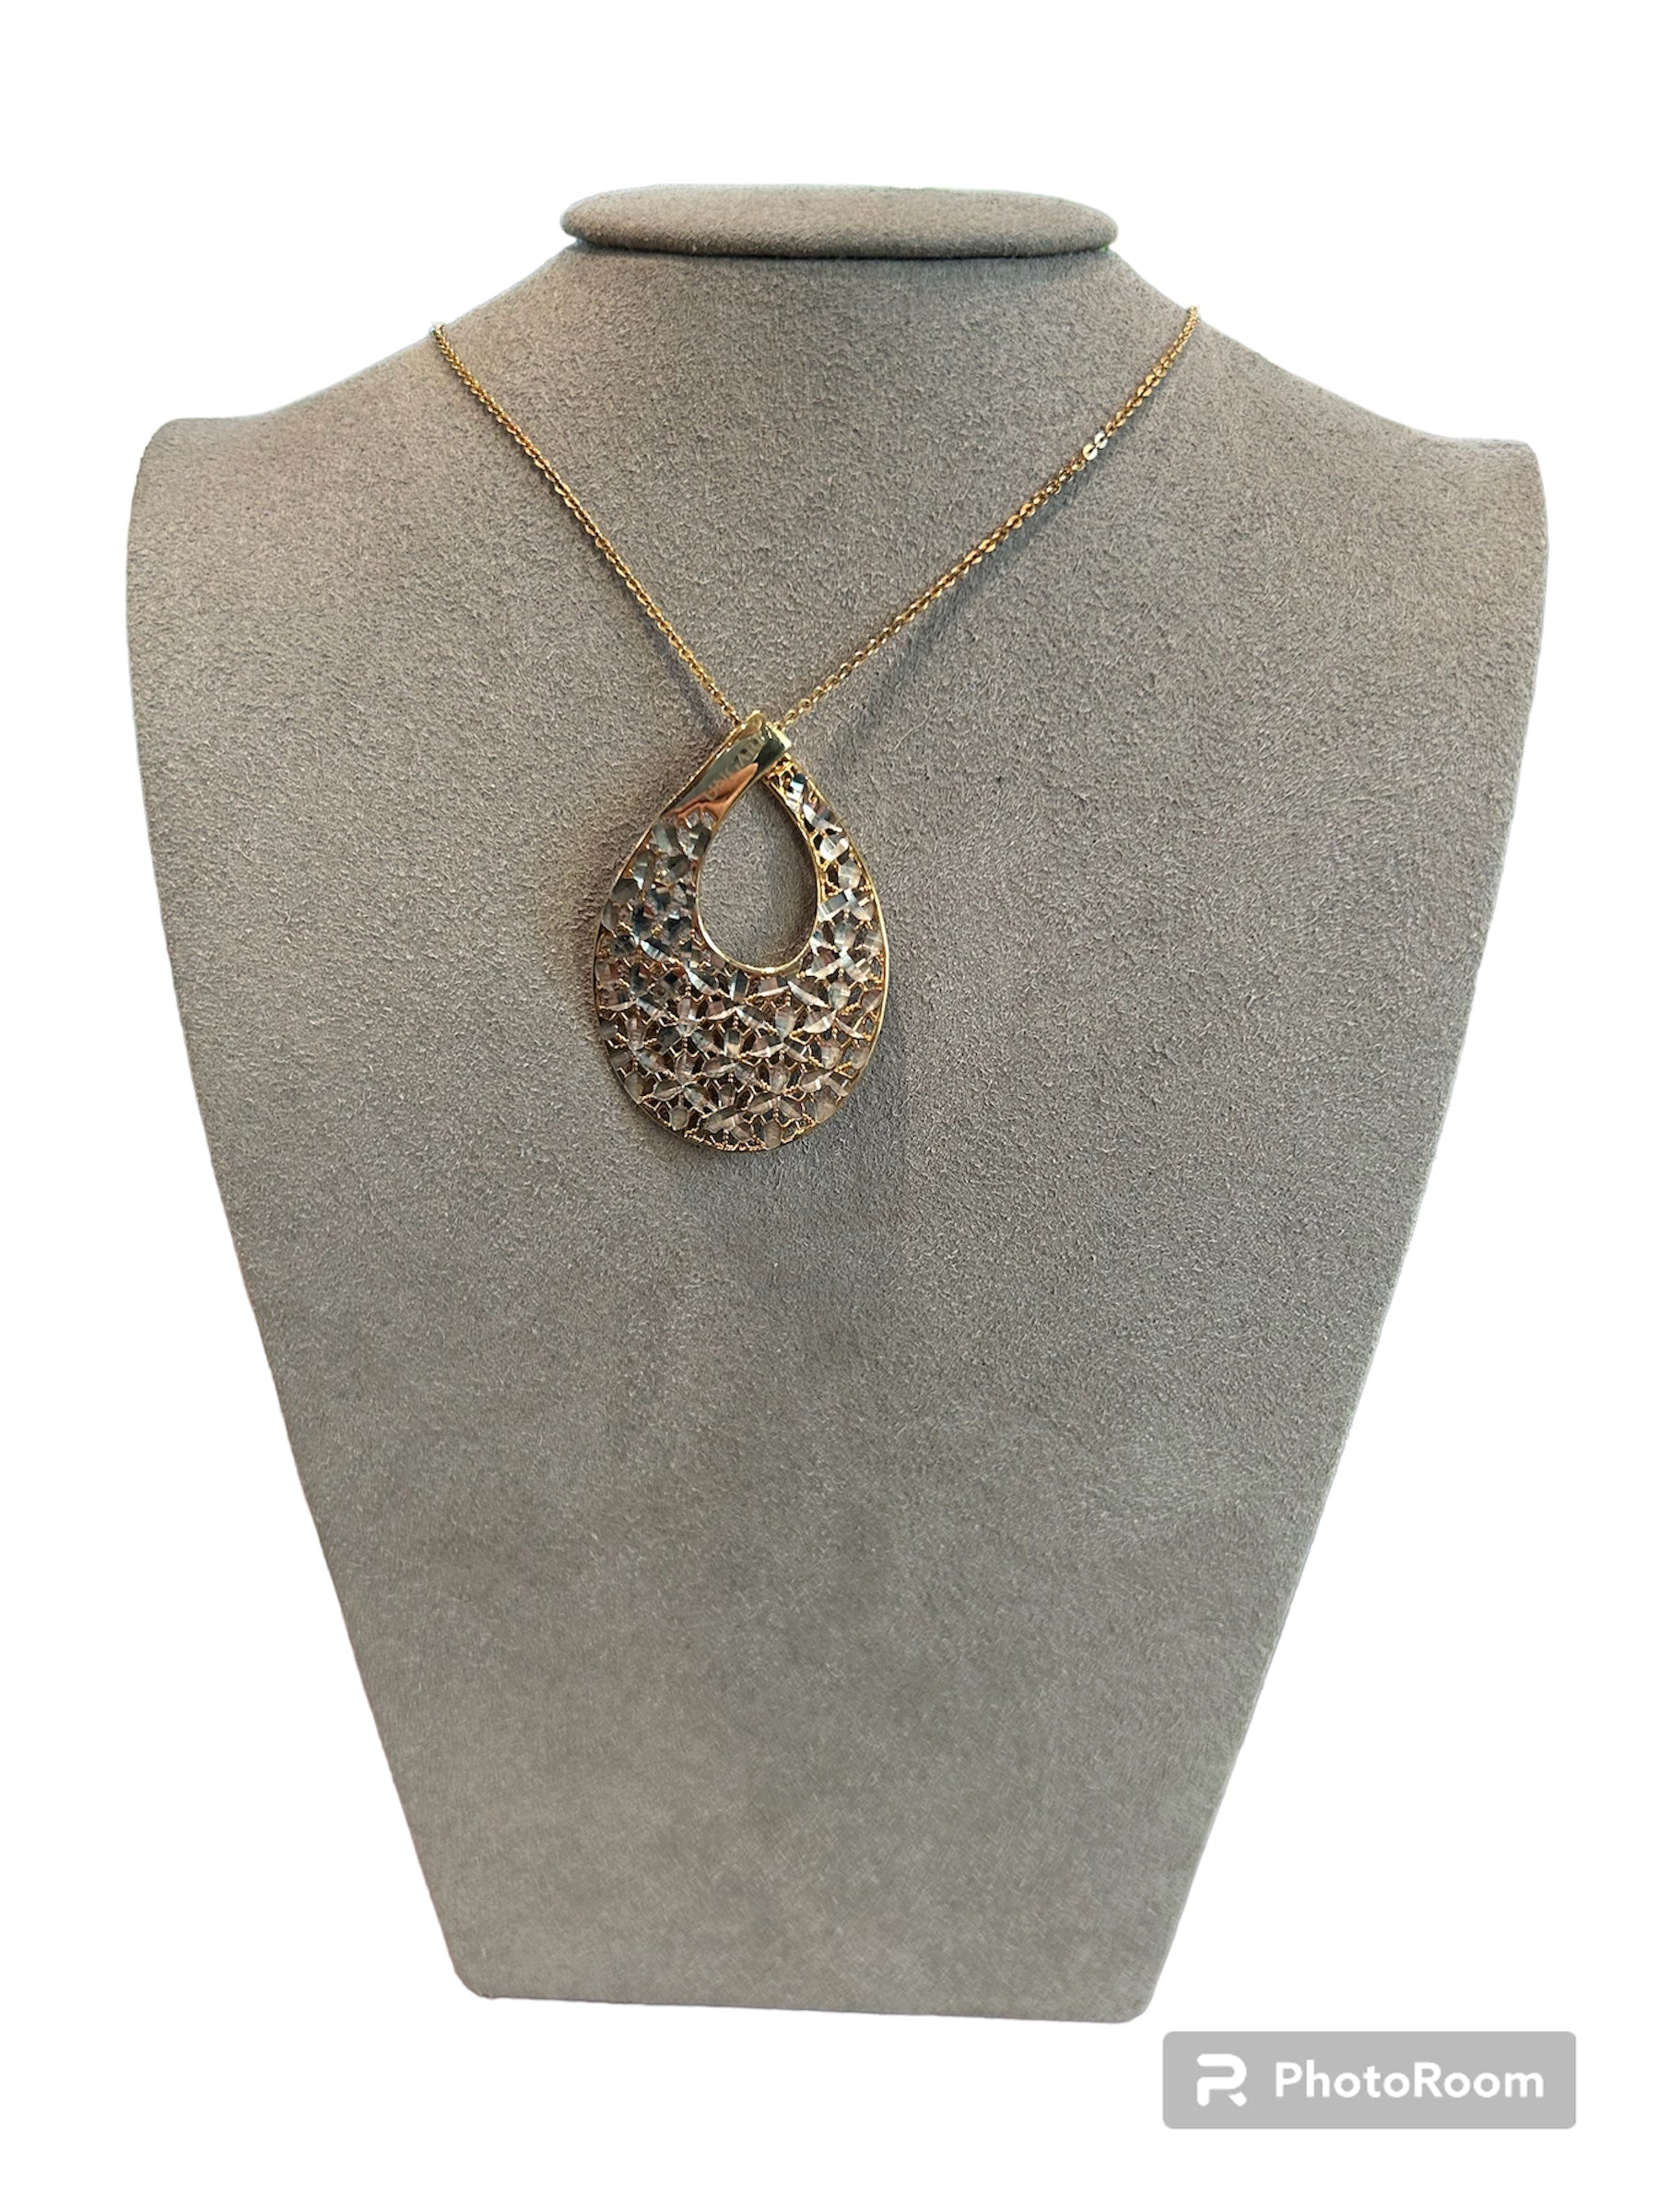 Gold silver necklace with medallion - CL 055G